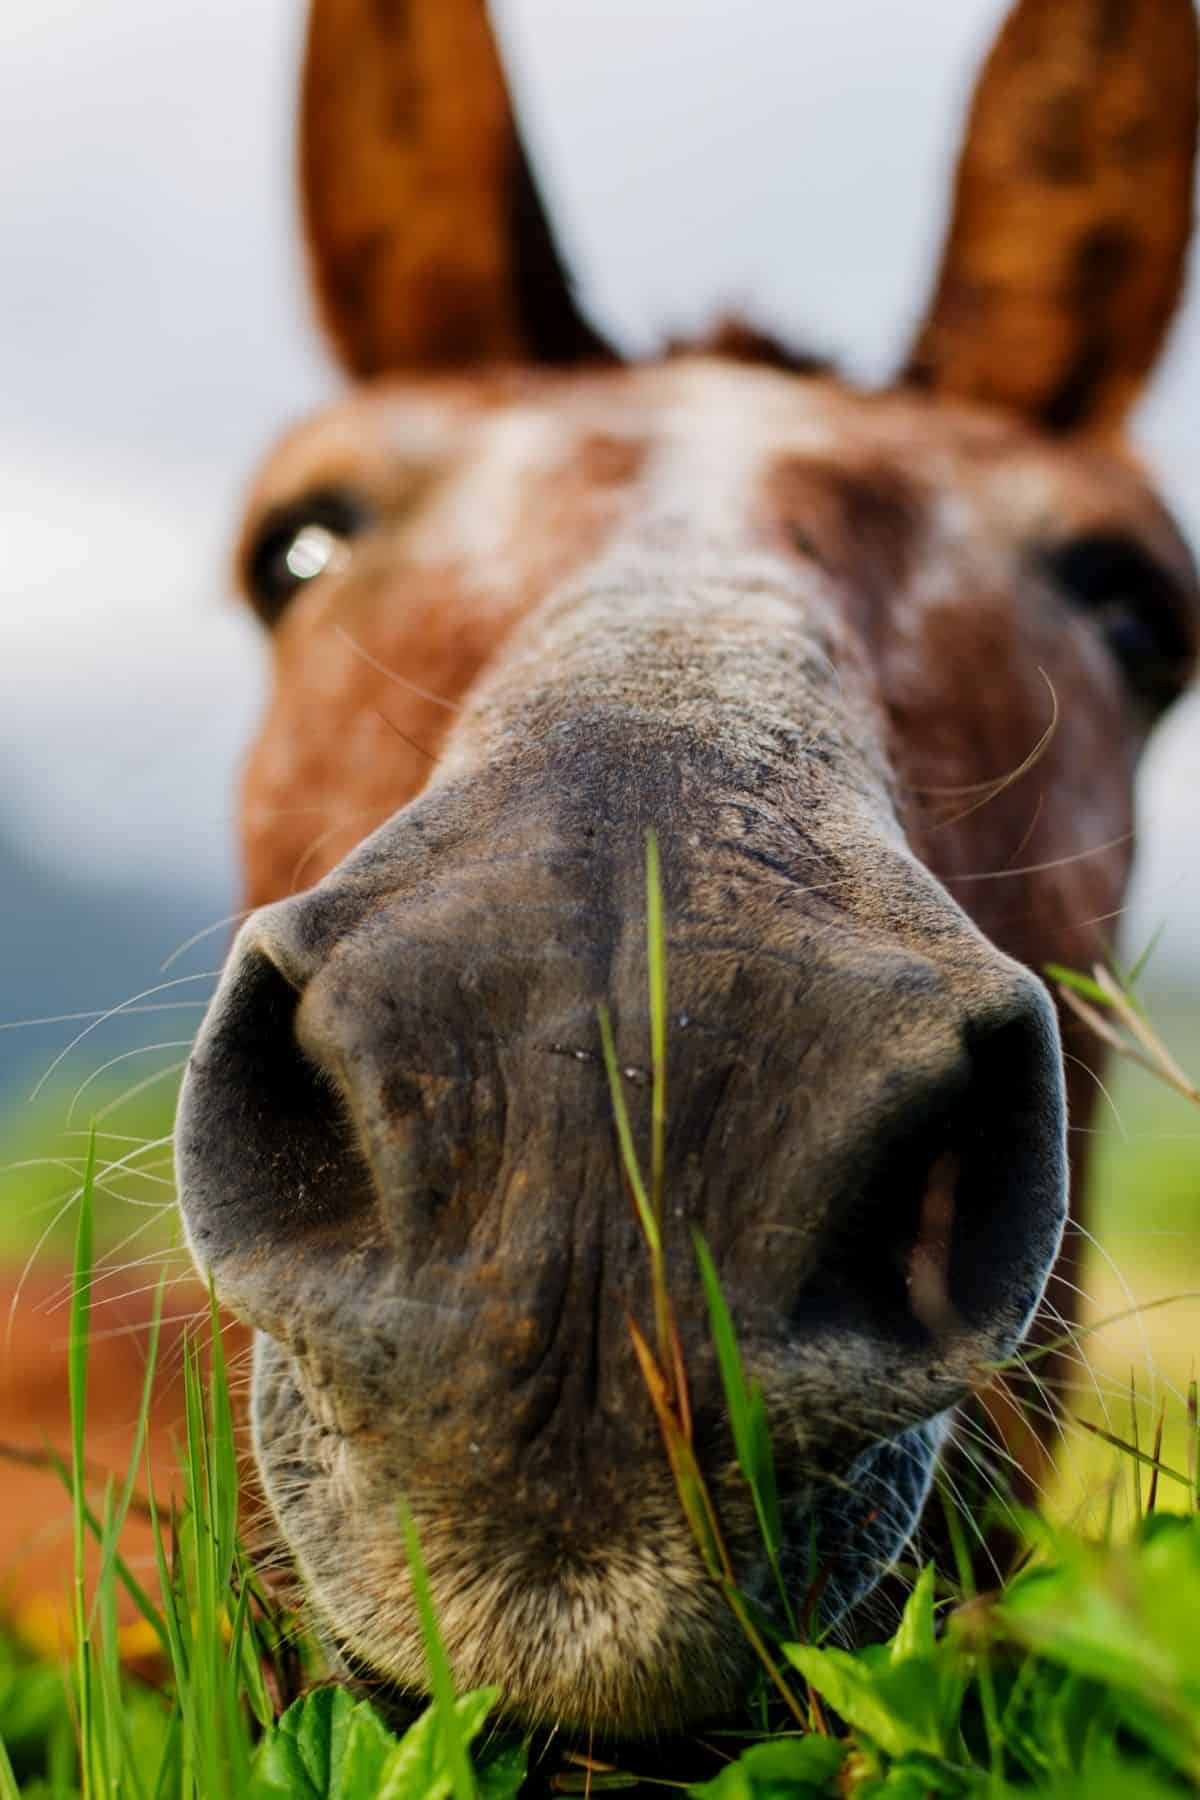 Close up horse face eating grass